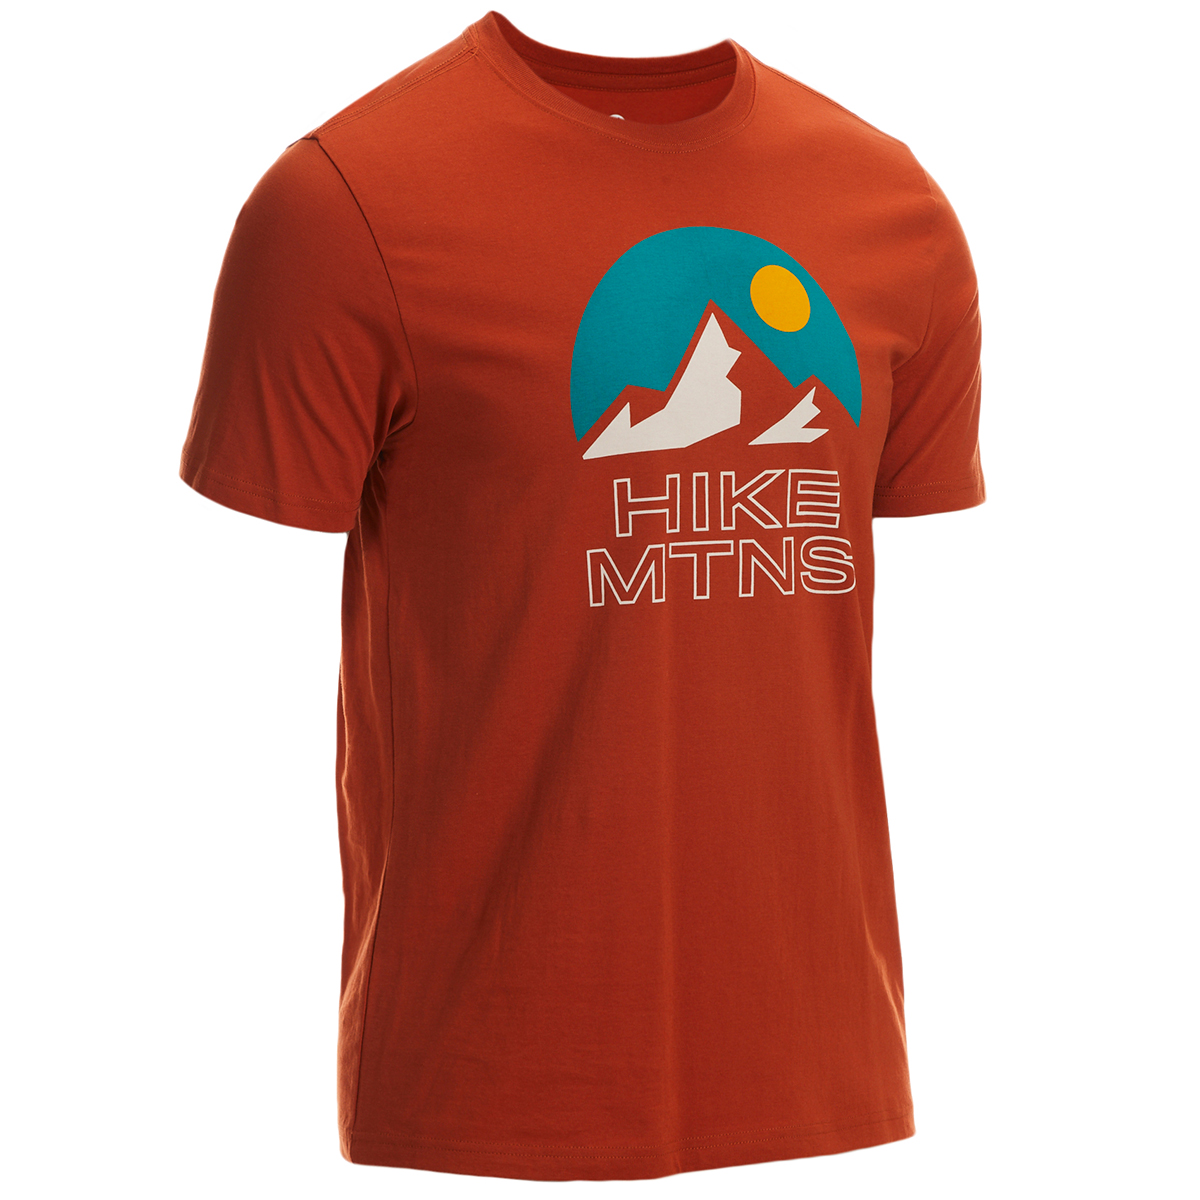 EMS Men's Hike Mountains Short Sleeve Graphic Tee - Size XL